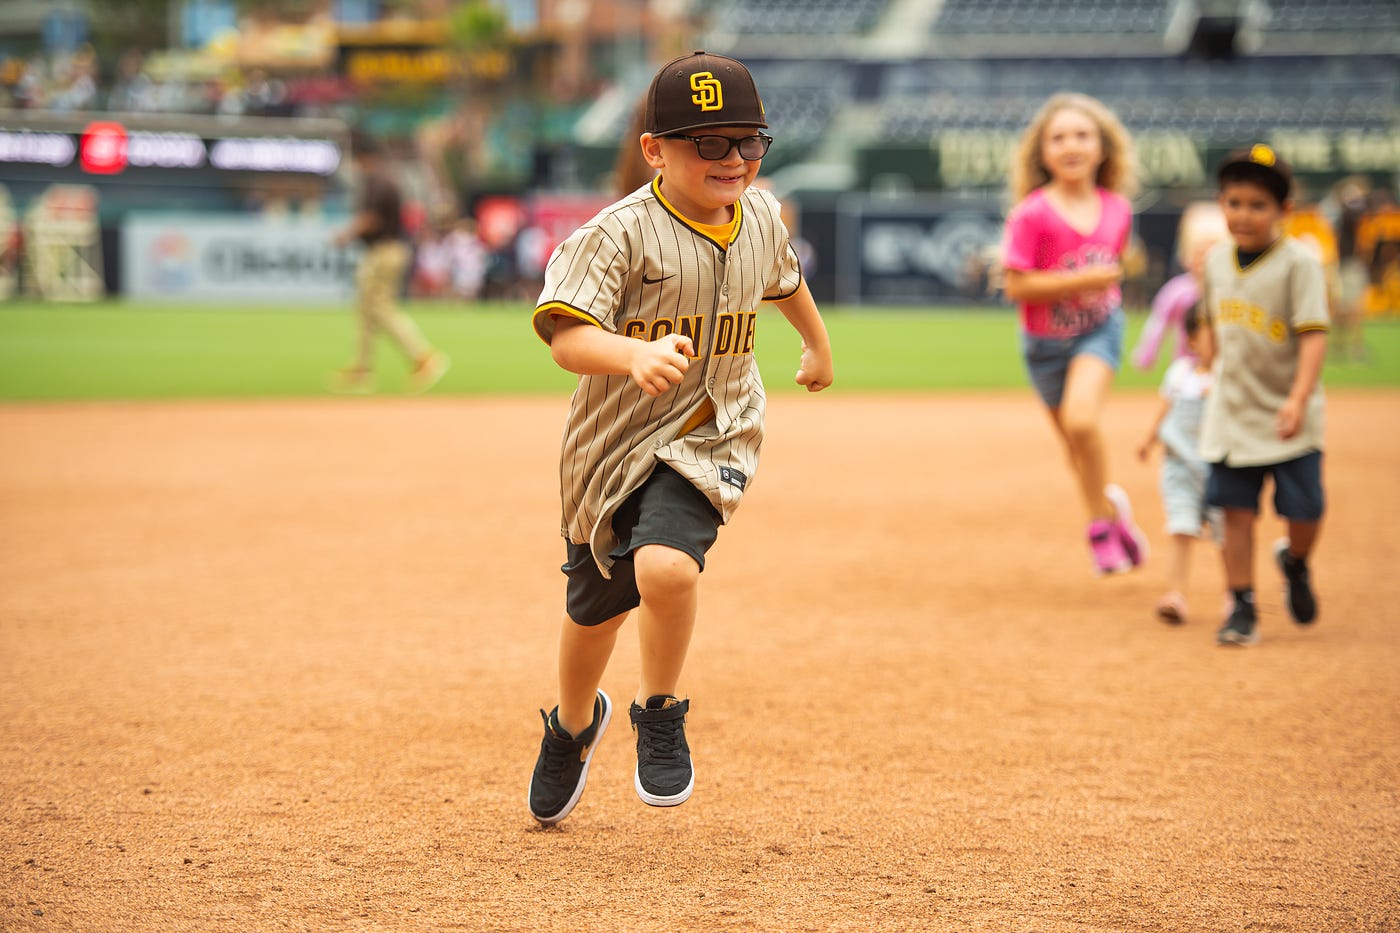 Happening Homestand: Joe Musgrove Bucket Hat Giveaway, Party in the Park,  KidsFest and More, by FriarWire